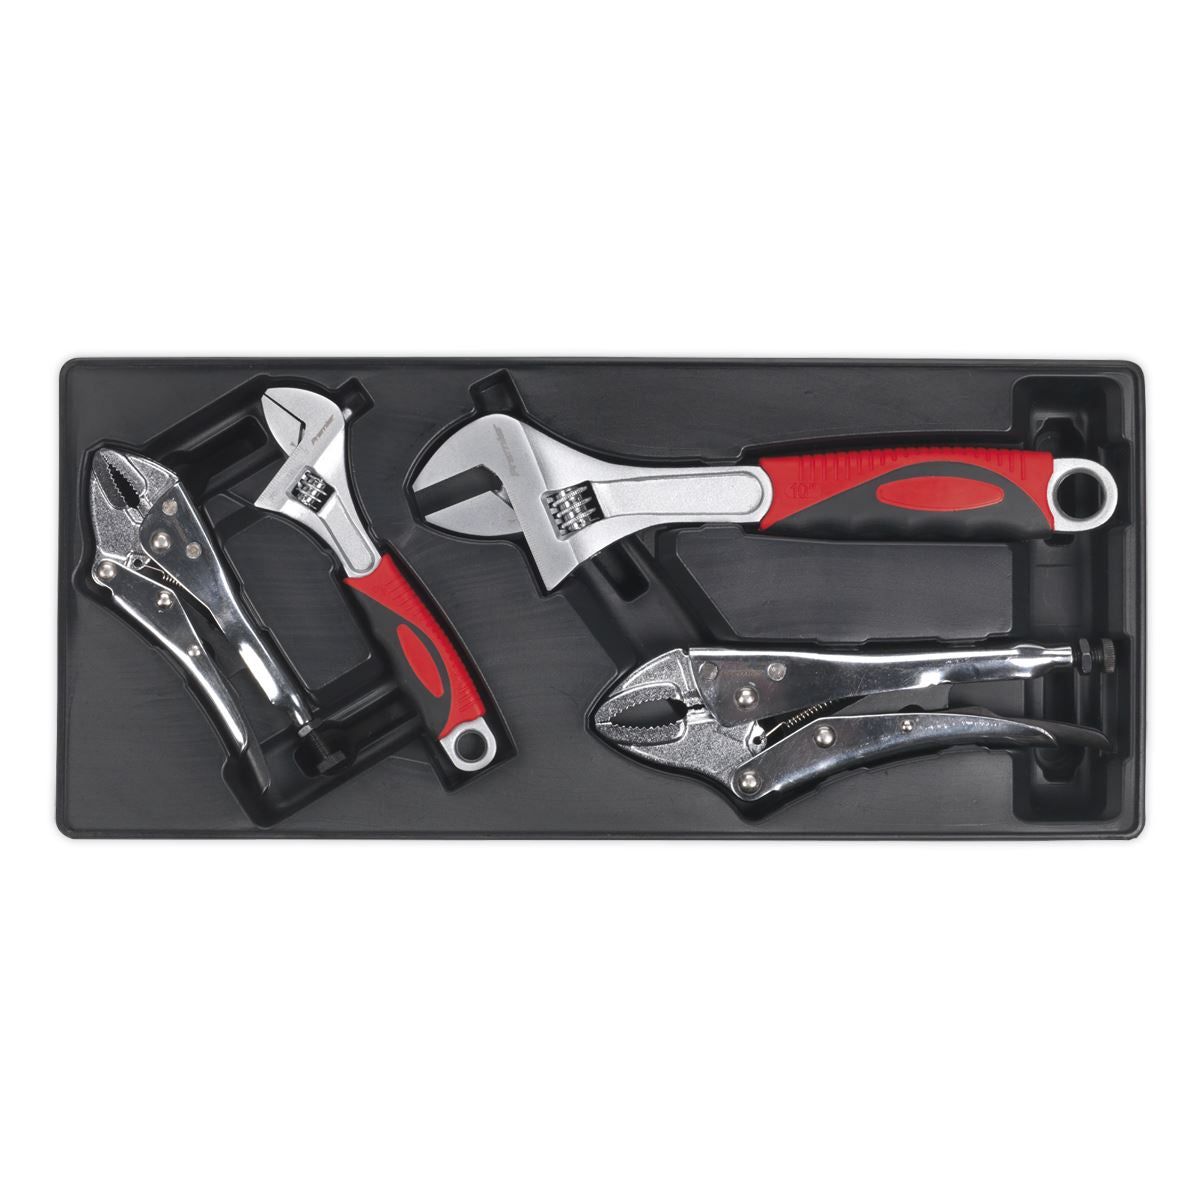 Sealey Premier Tool Tray with Locking Pliers & Adjustable Wrench Set 4pc